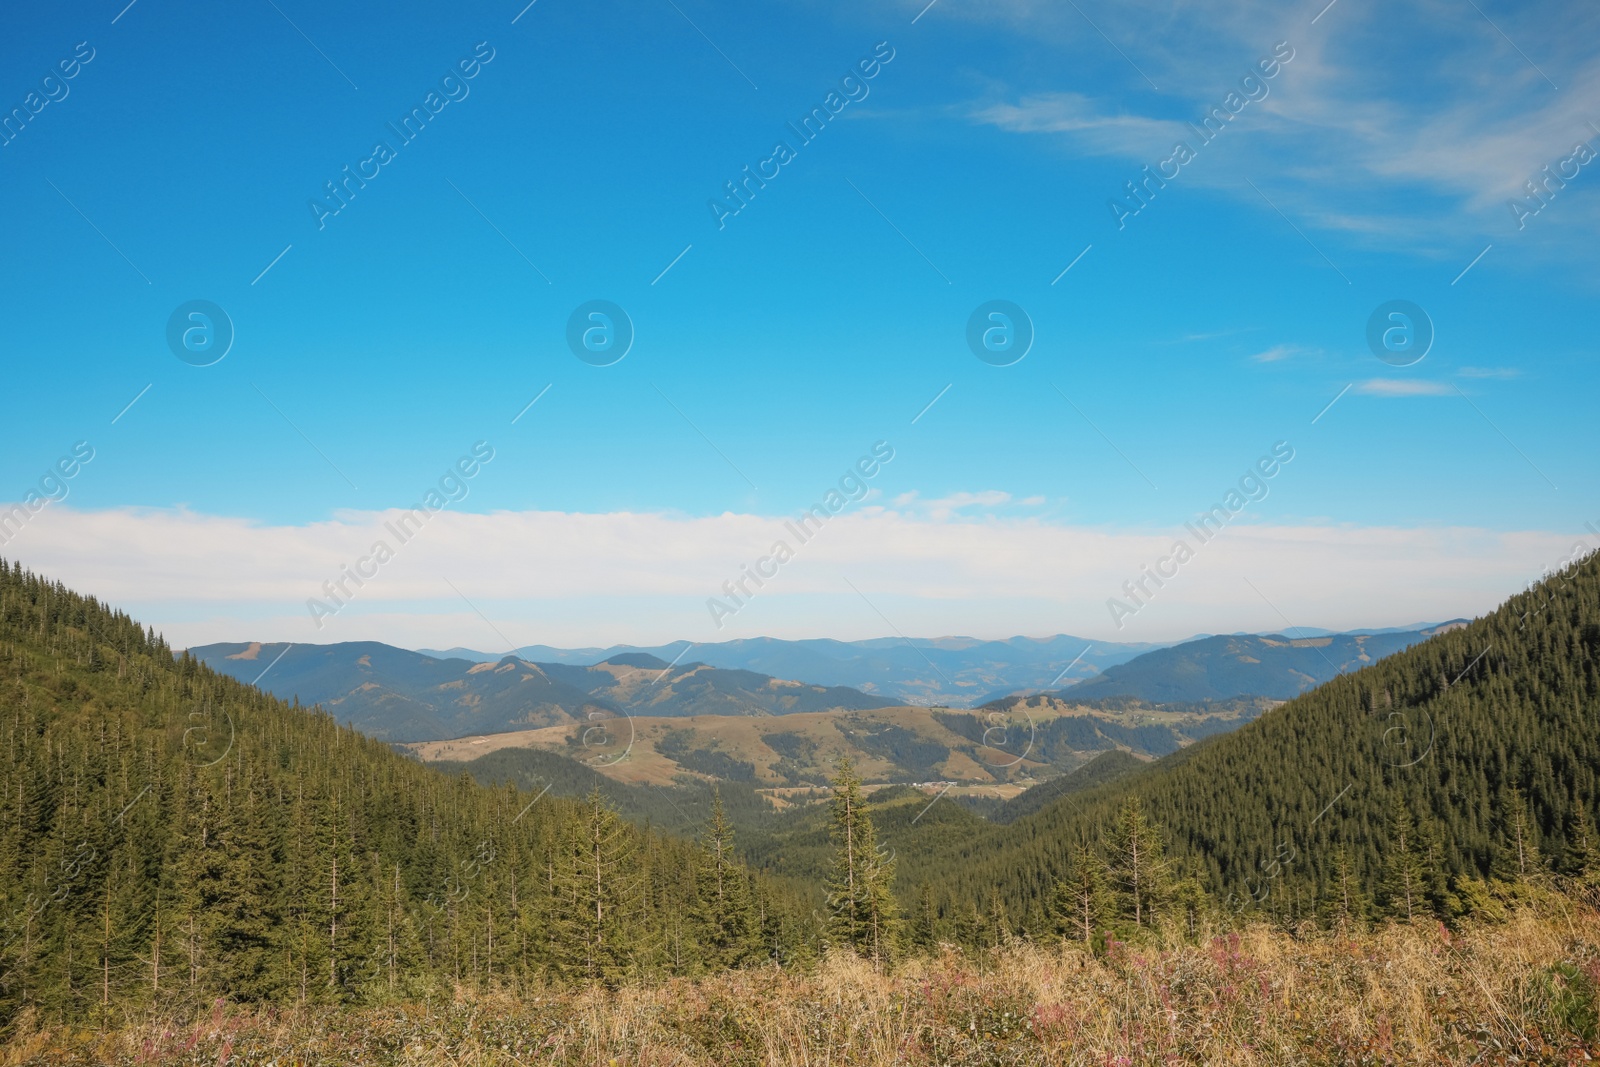 Photo of Picturesque view of sky with clouds over mountains